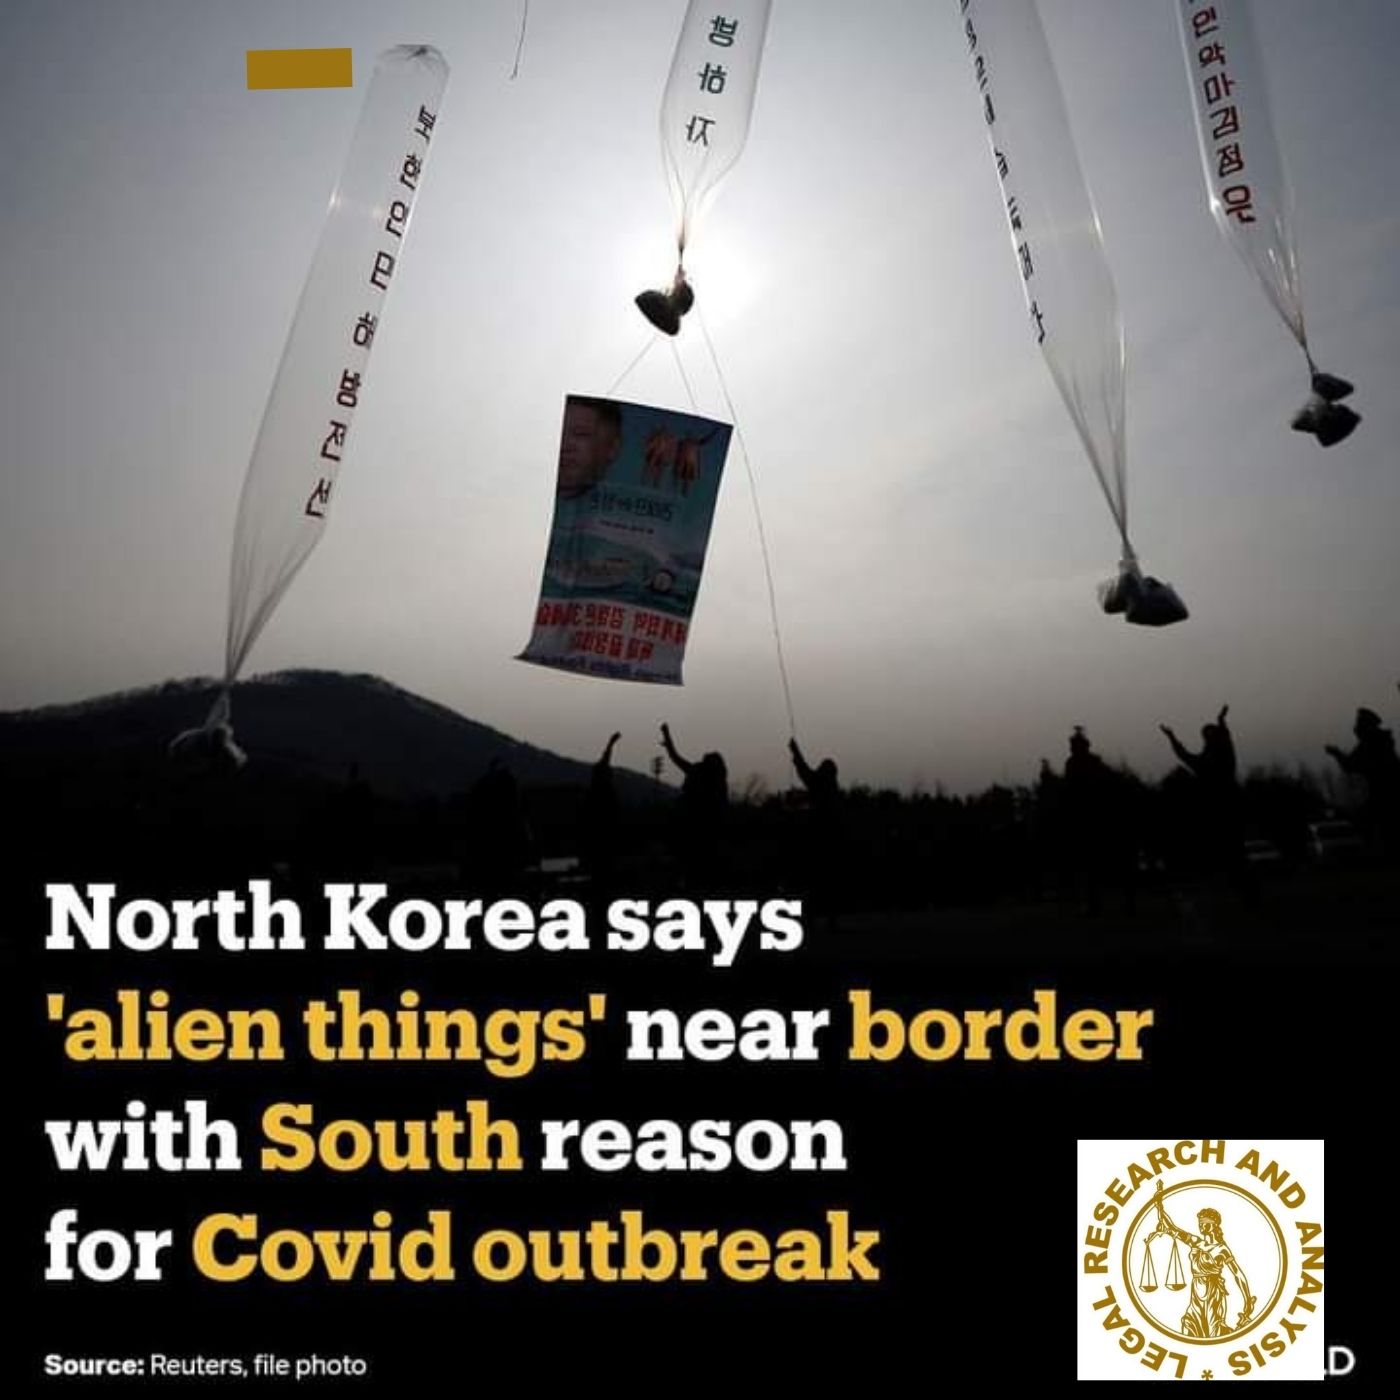 North Korea says 'Alien things' near the border with the South are the reason for the Covid outbreak.